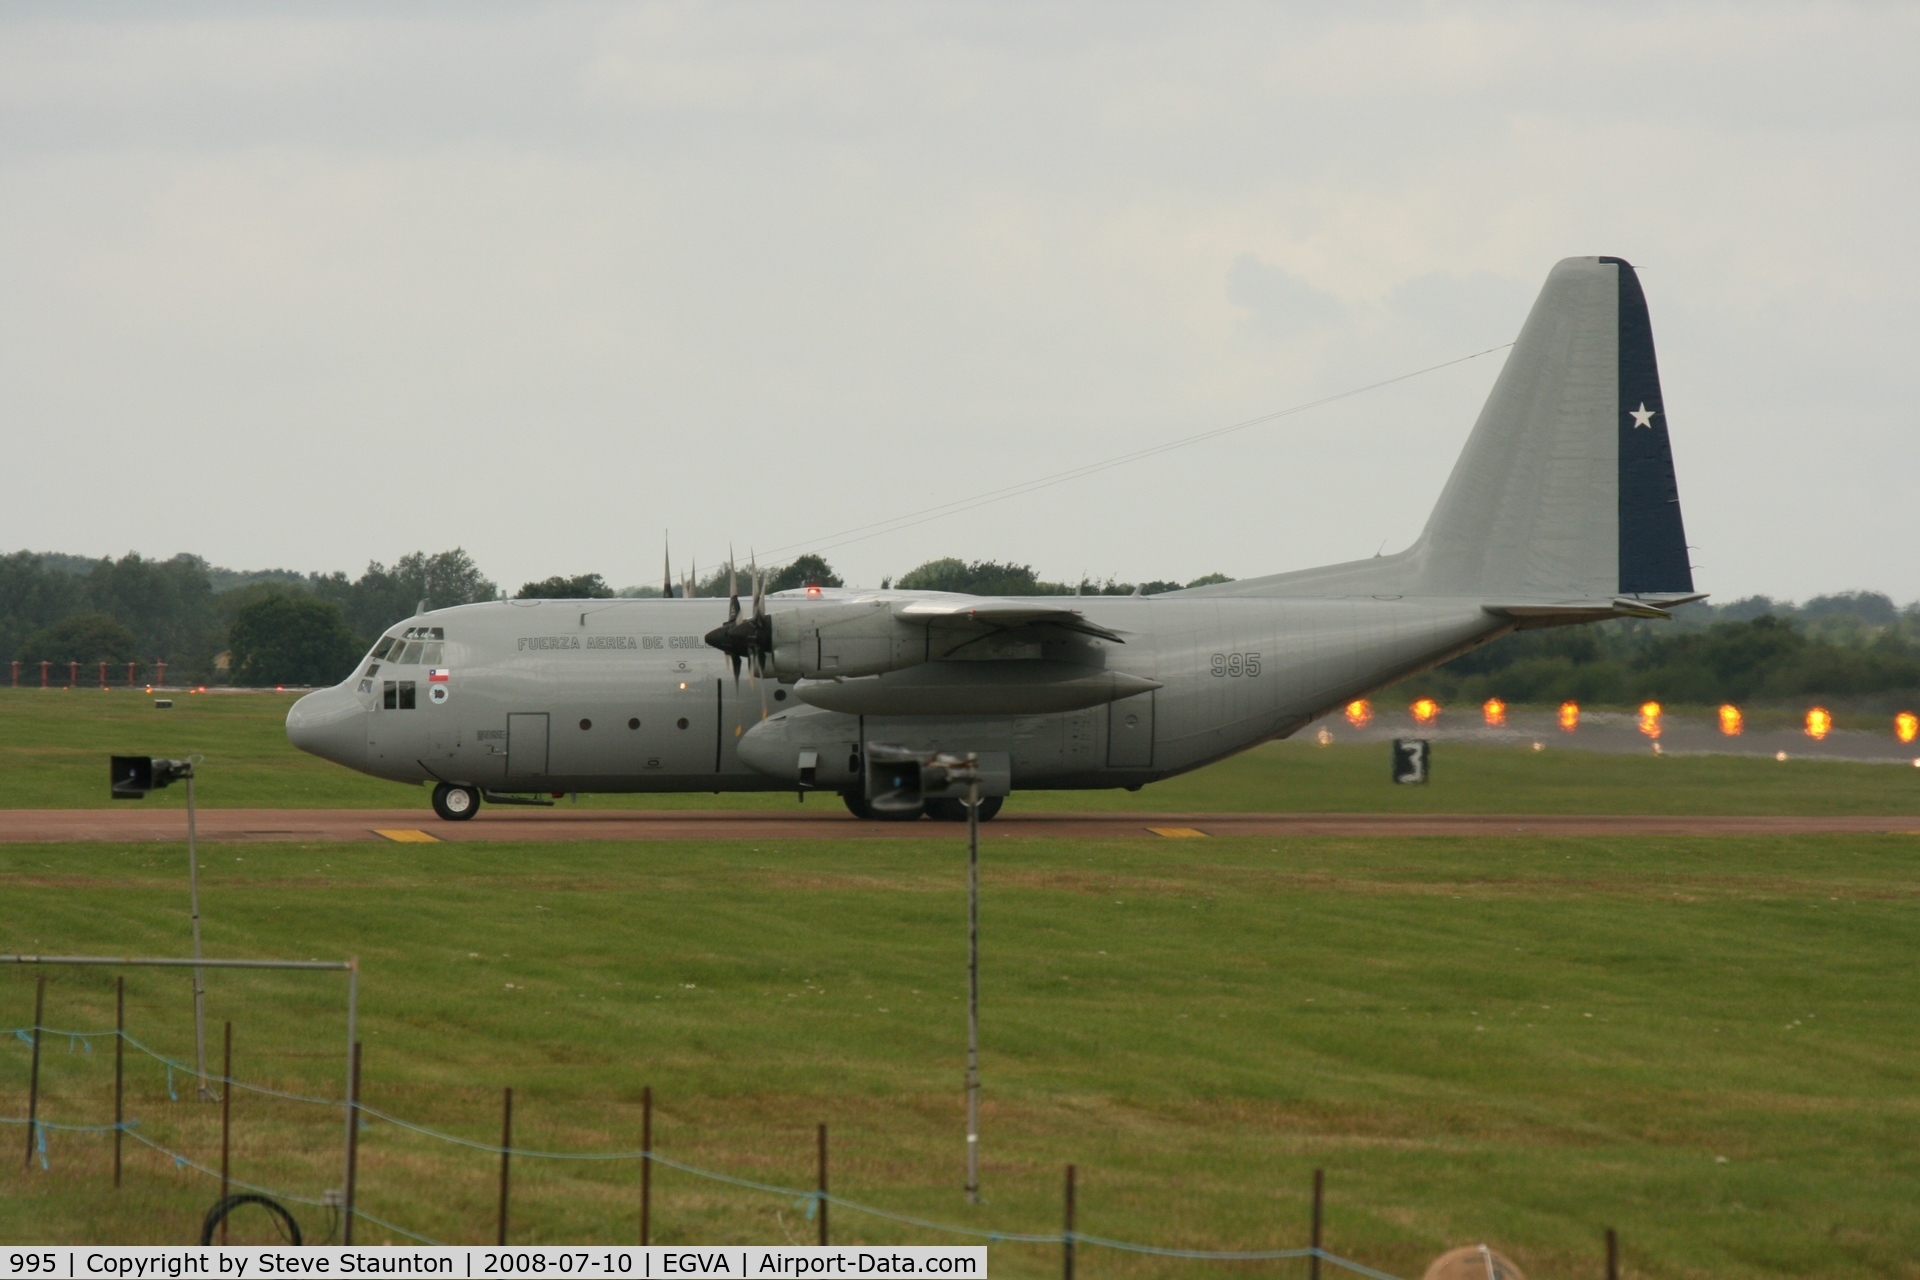 995, 1971 Lockheed C-130H Hercules C/N 382-4453, Taken at the Royal International Air Tattoo 2008 during arrivals and departures (show days cancelled due to bad weather)